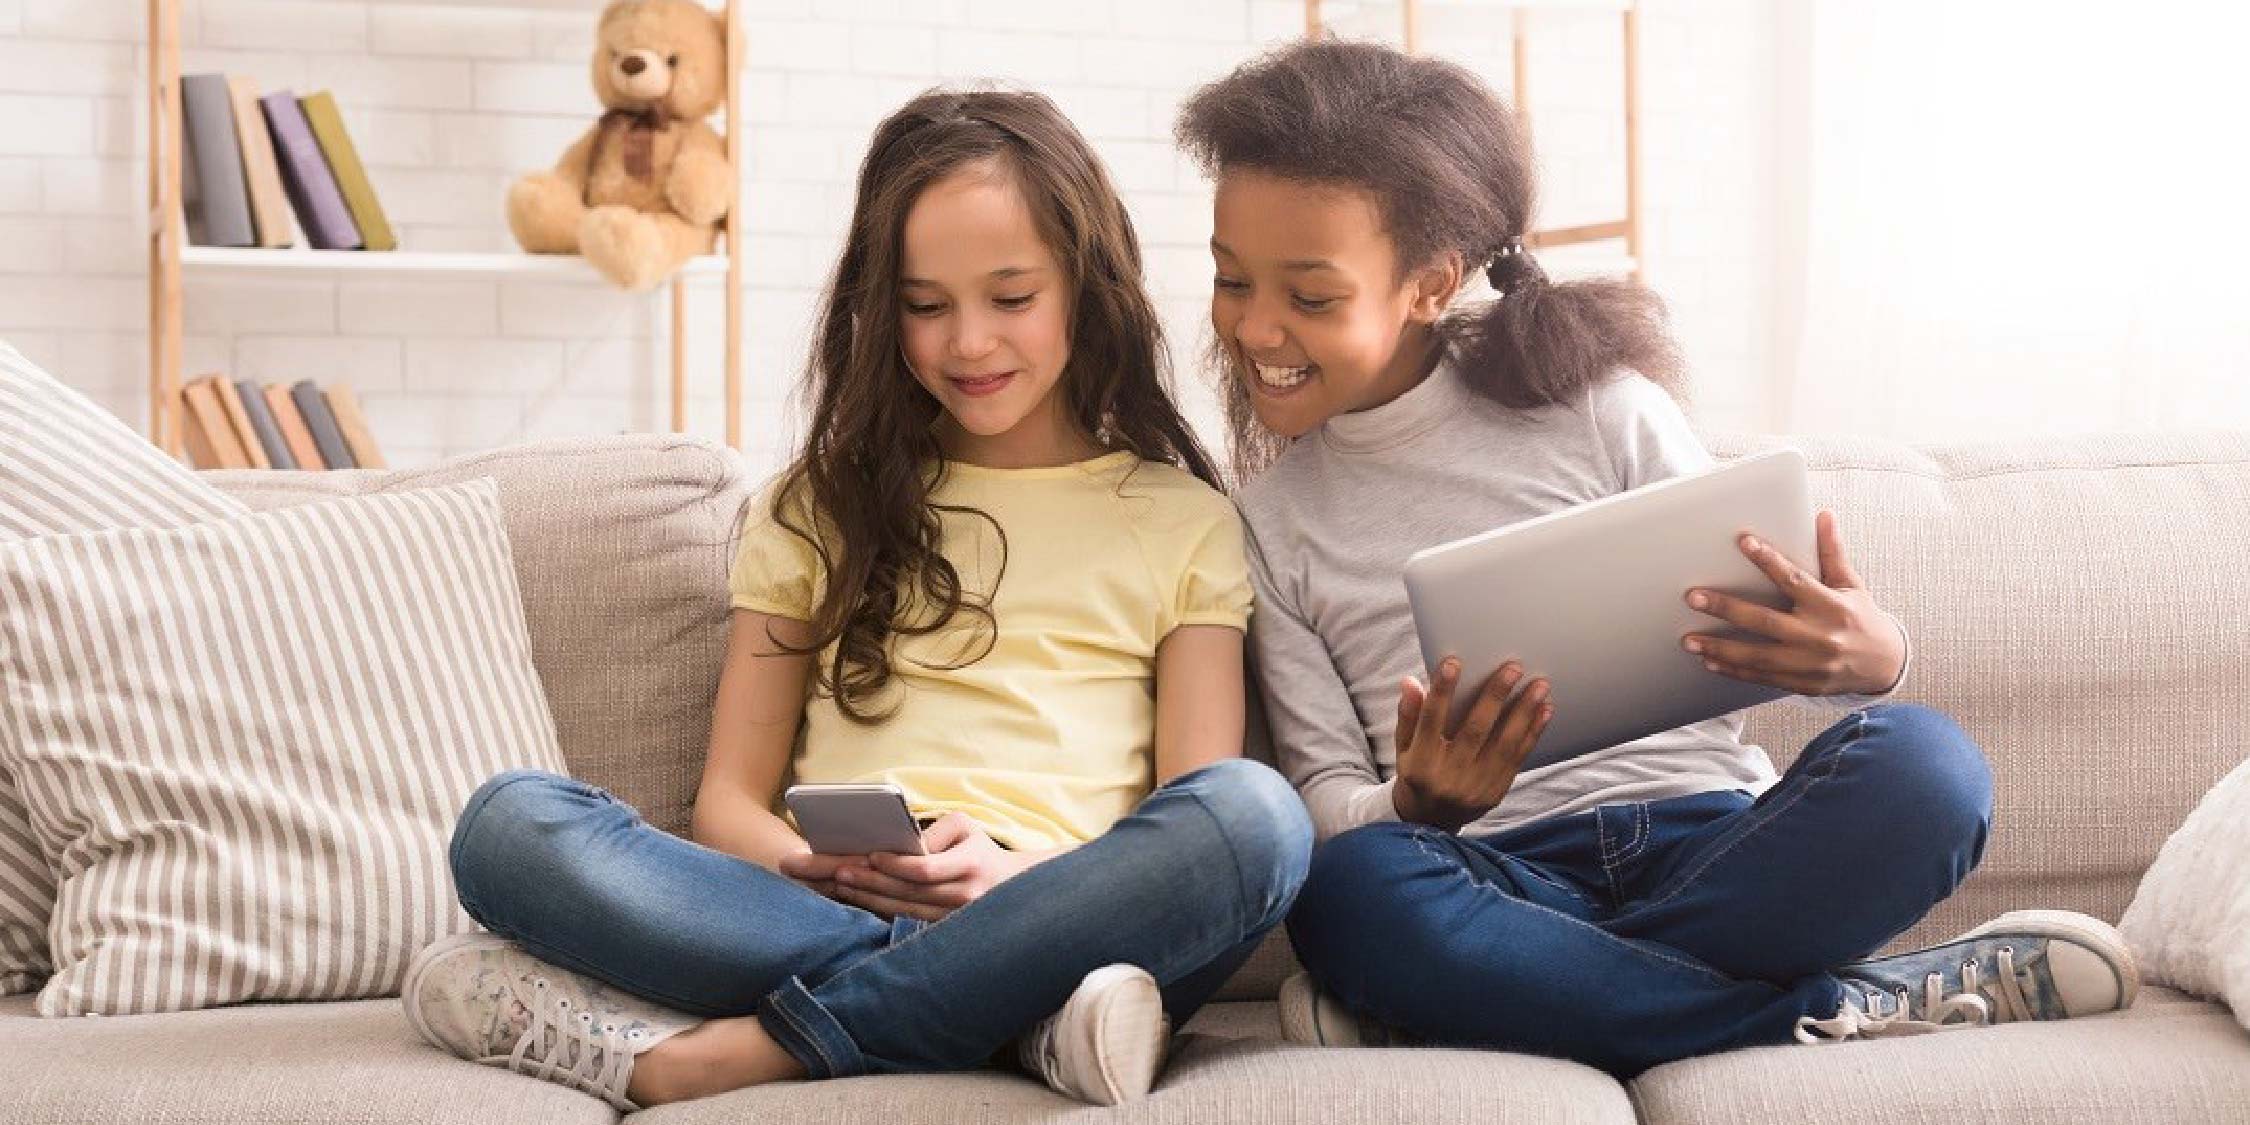 Two girls playing on devices. 